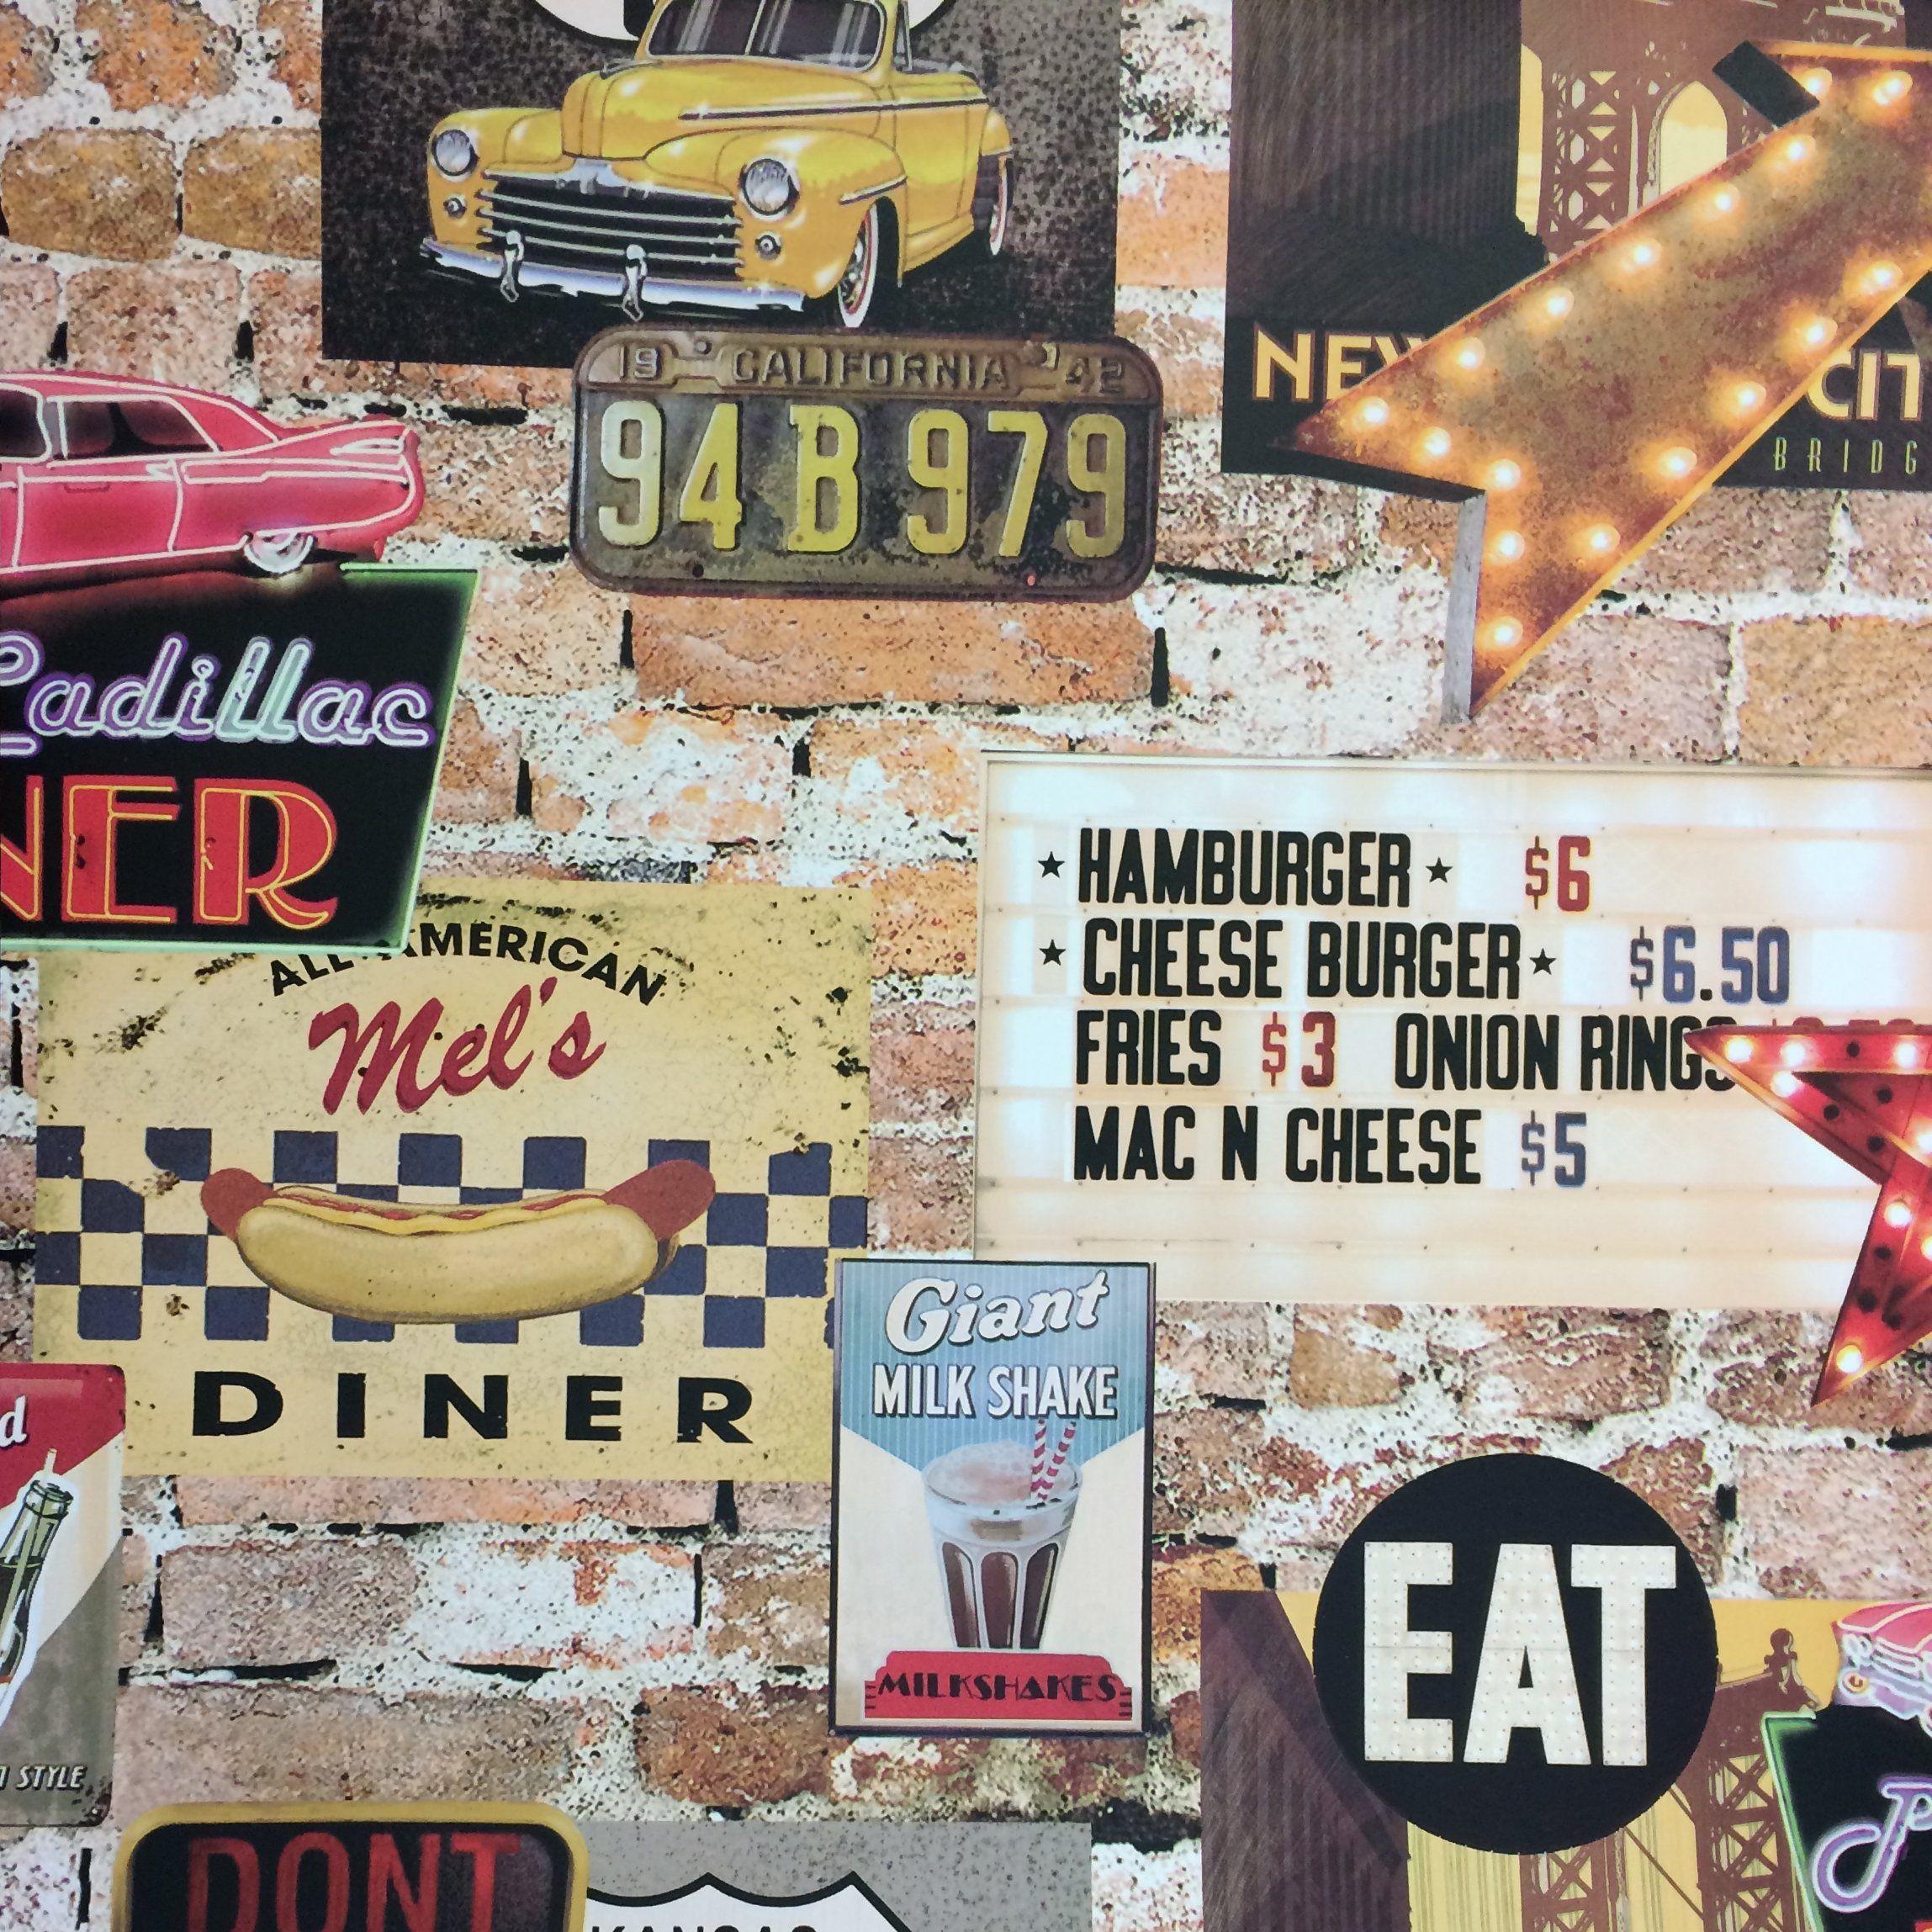 Arthouse American Diner Wallpaper. Free Image to use